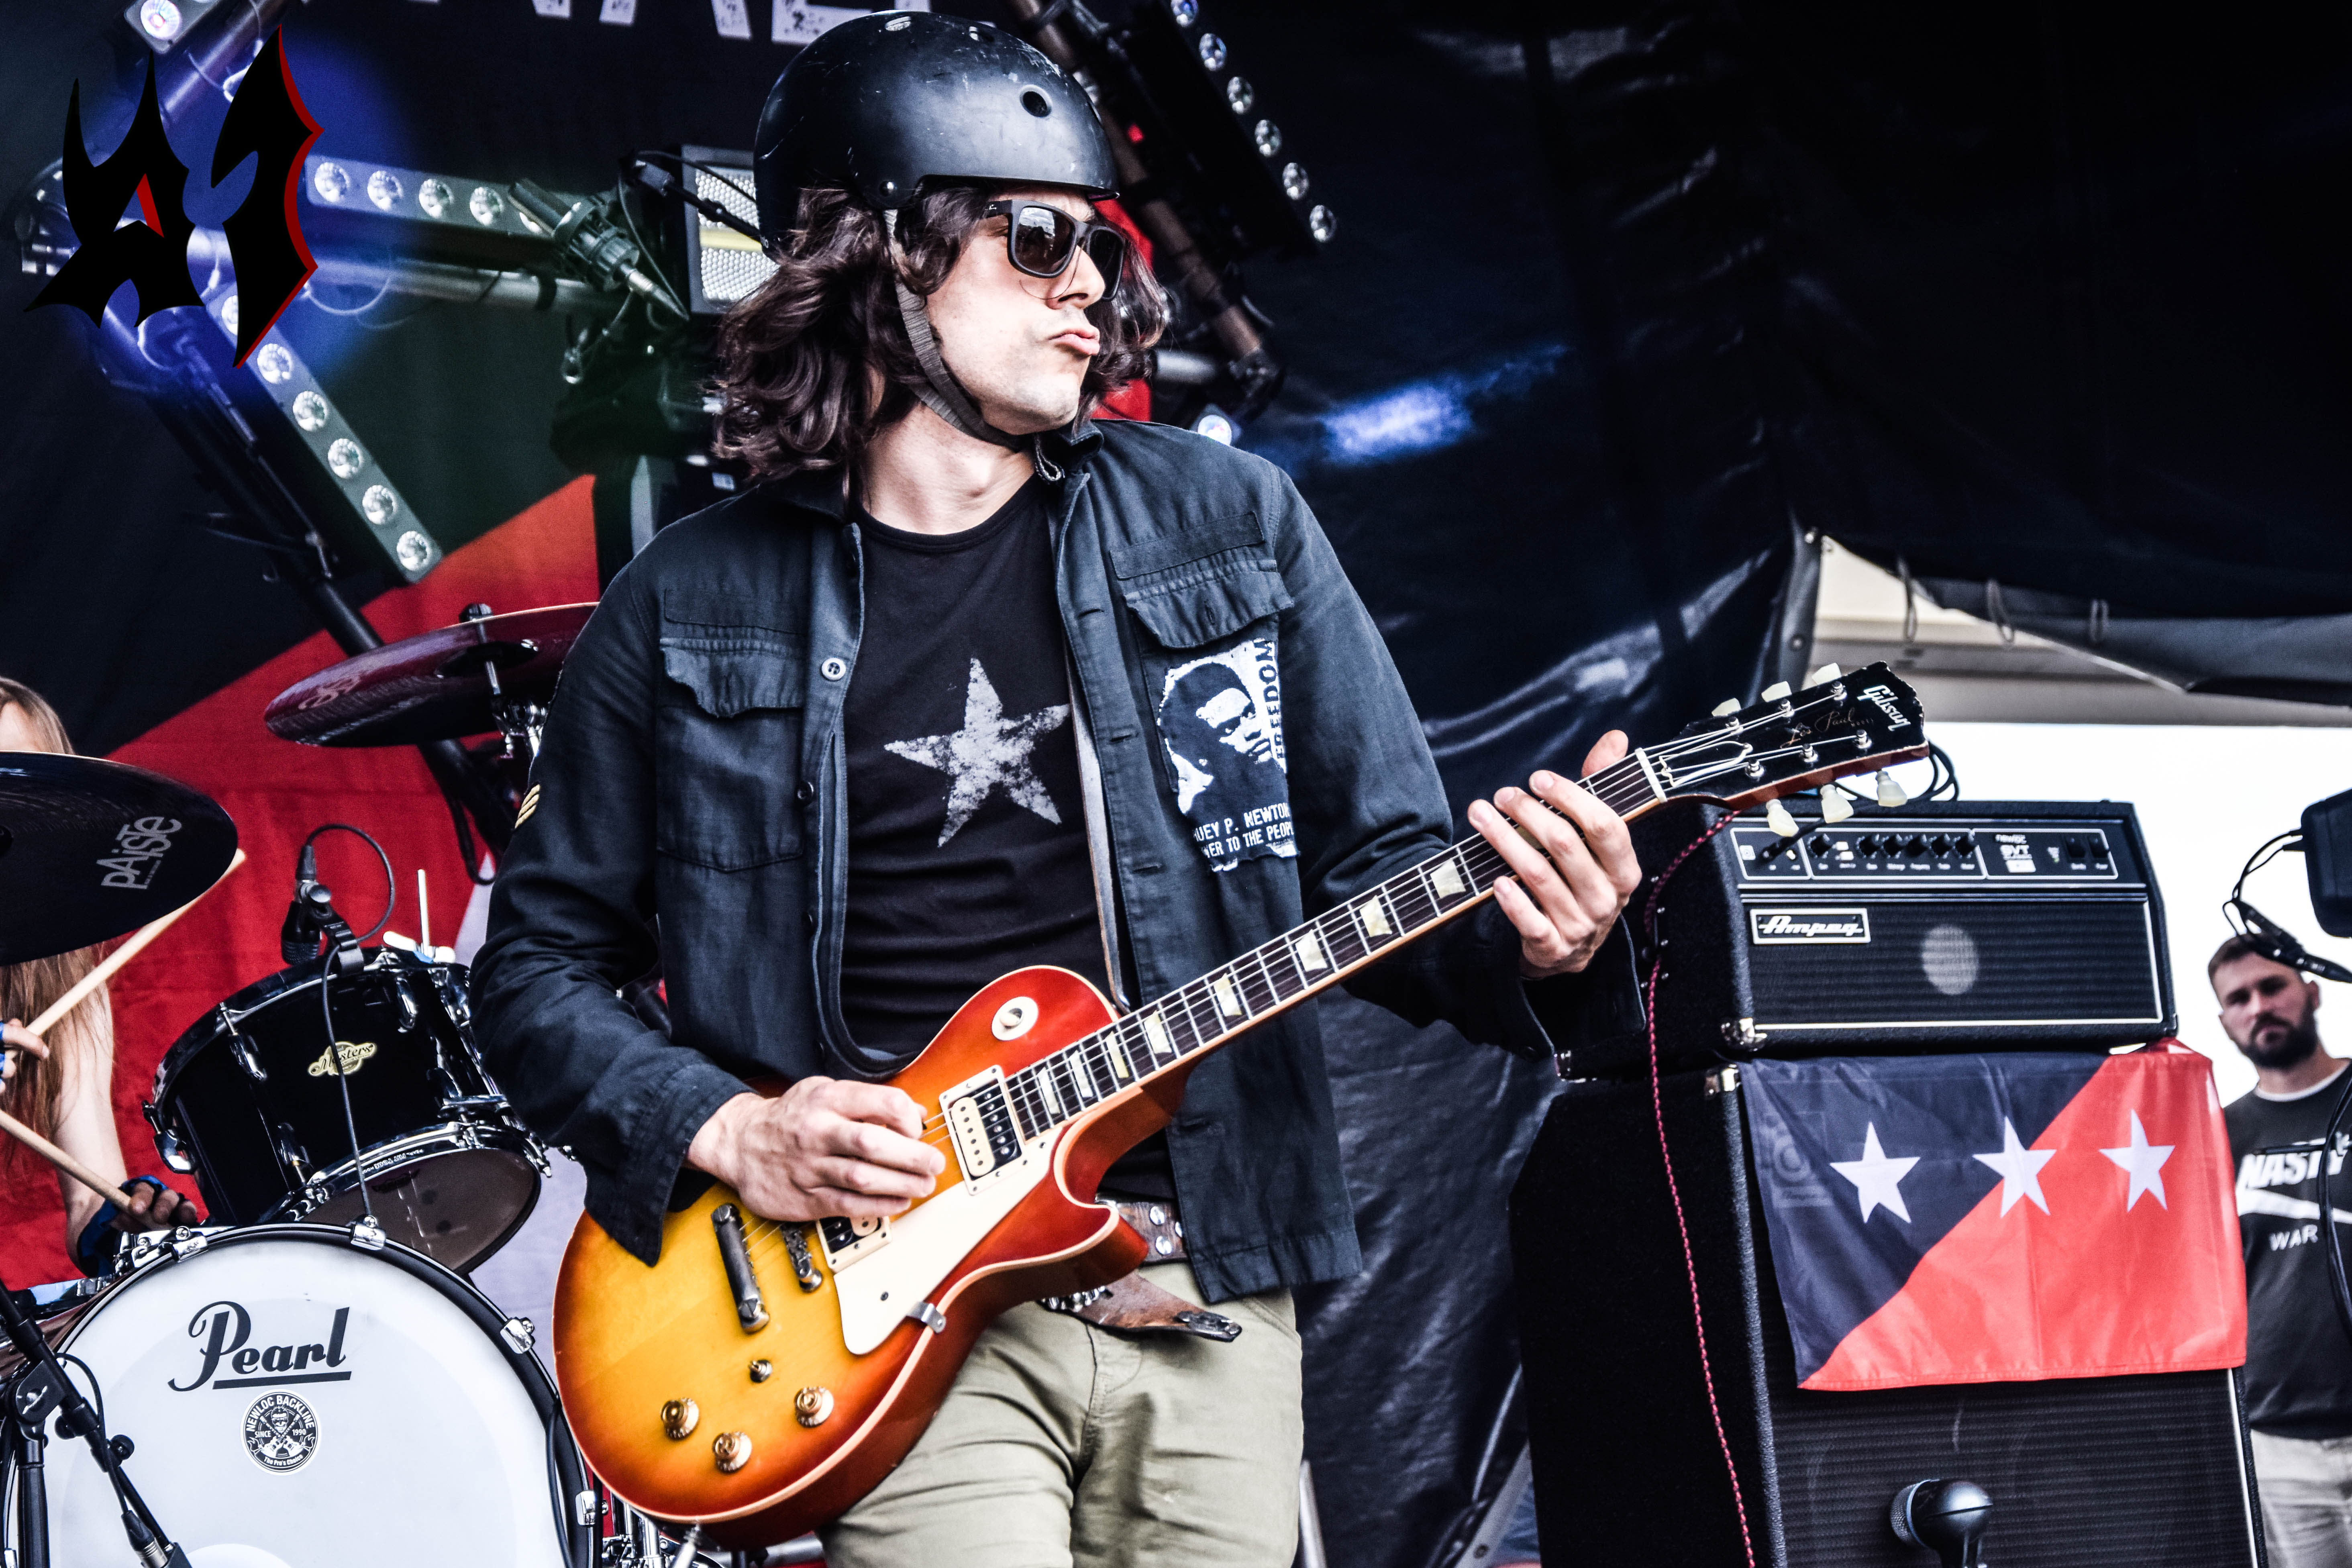 Donwload 2018 – Day 3 - The Last Internationale 13